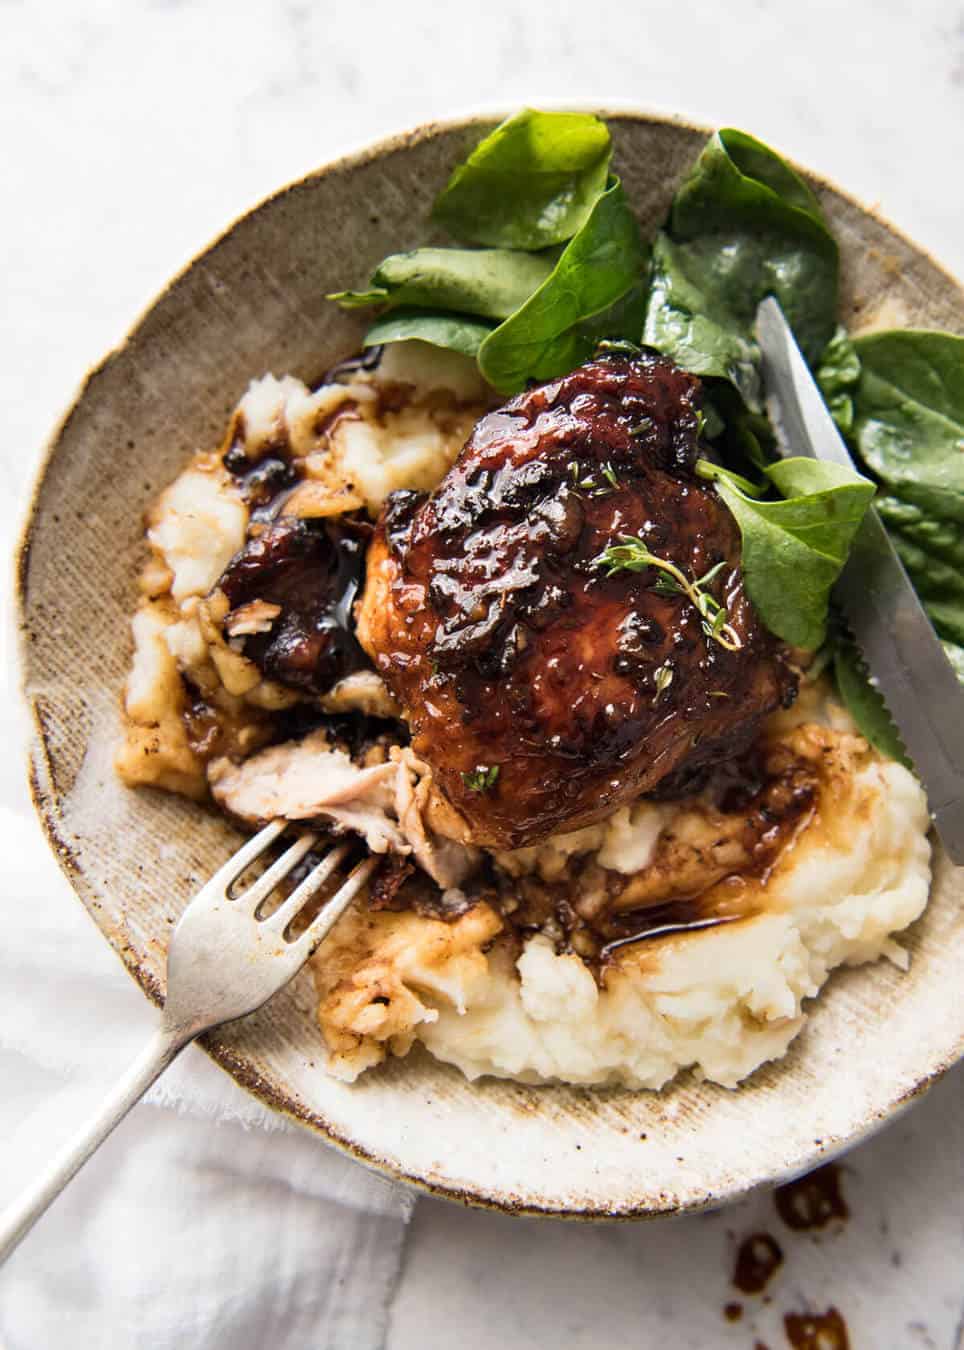 Balsamic vinegar, soy sauce, honey, sugar and garlic is all you need to make this super easy and fast Baked Balsamic Chicken! No marinating required. www.recipetineats.com